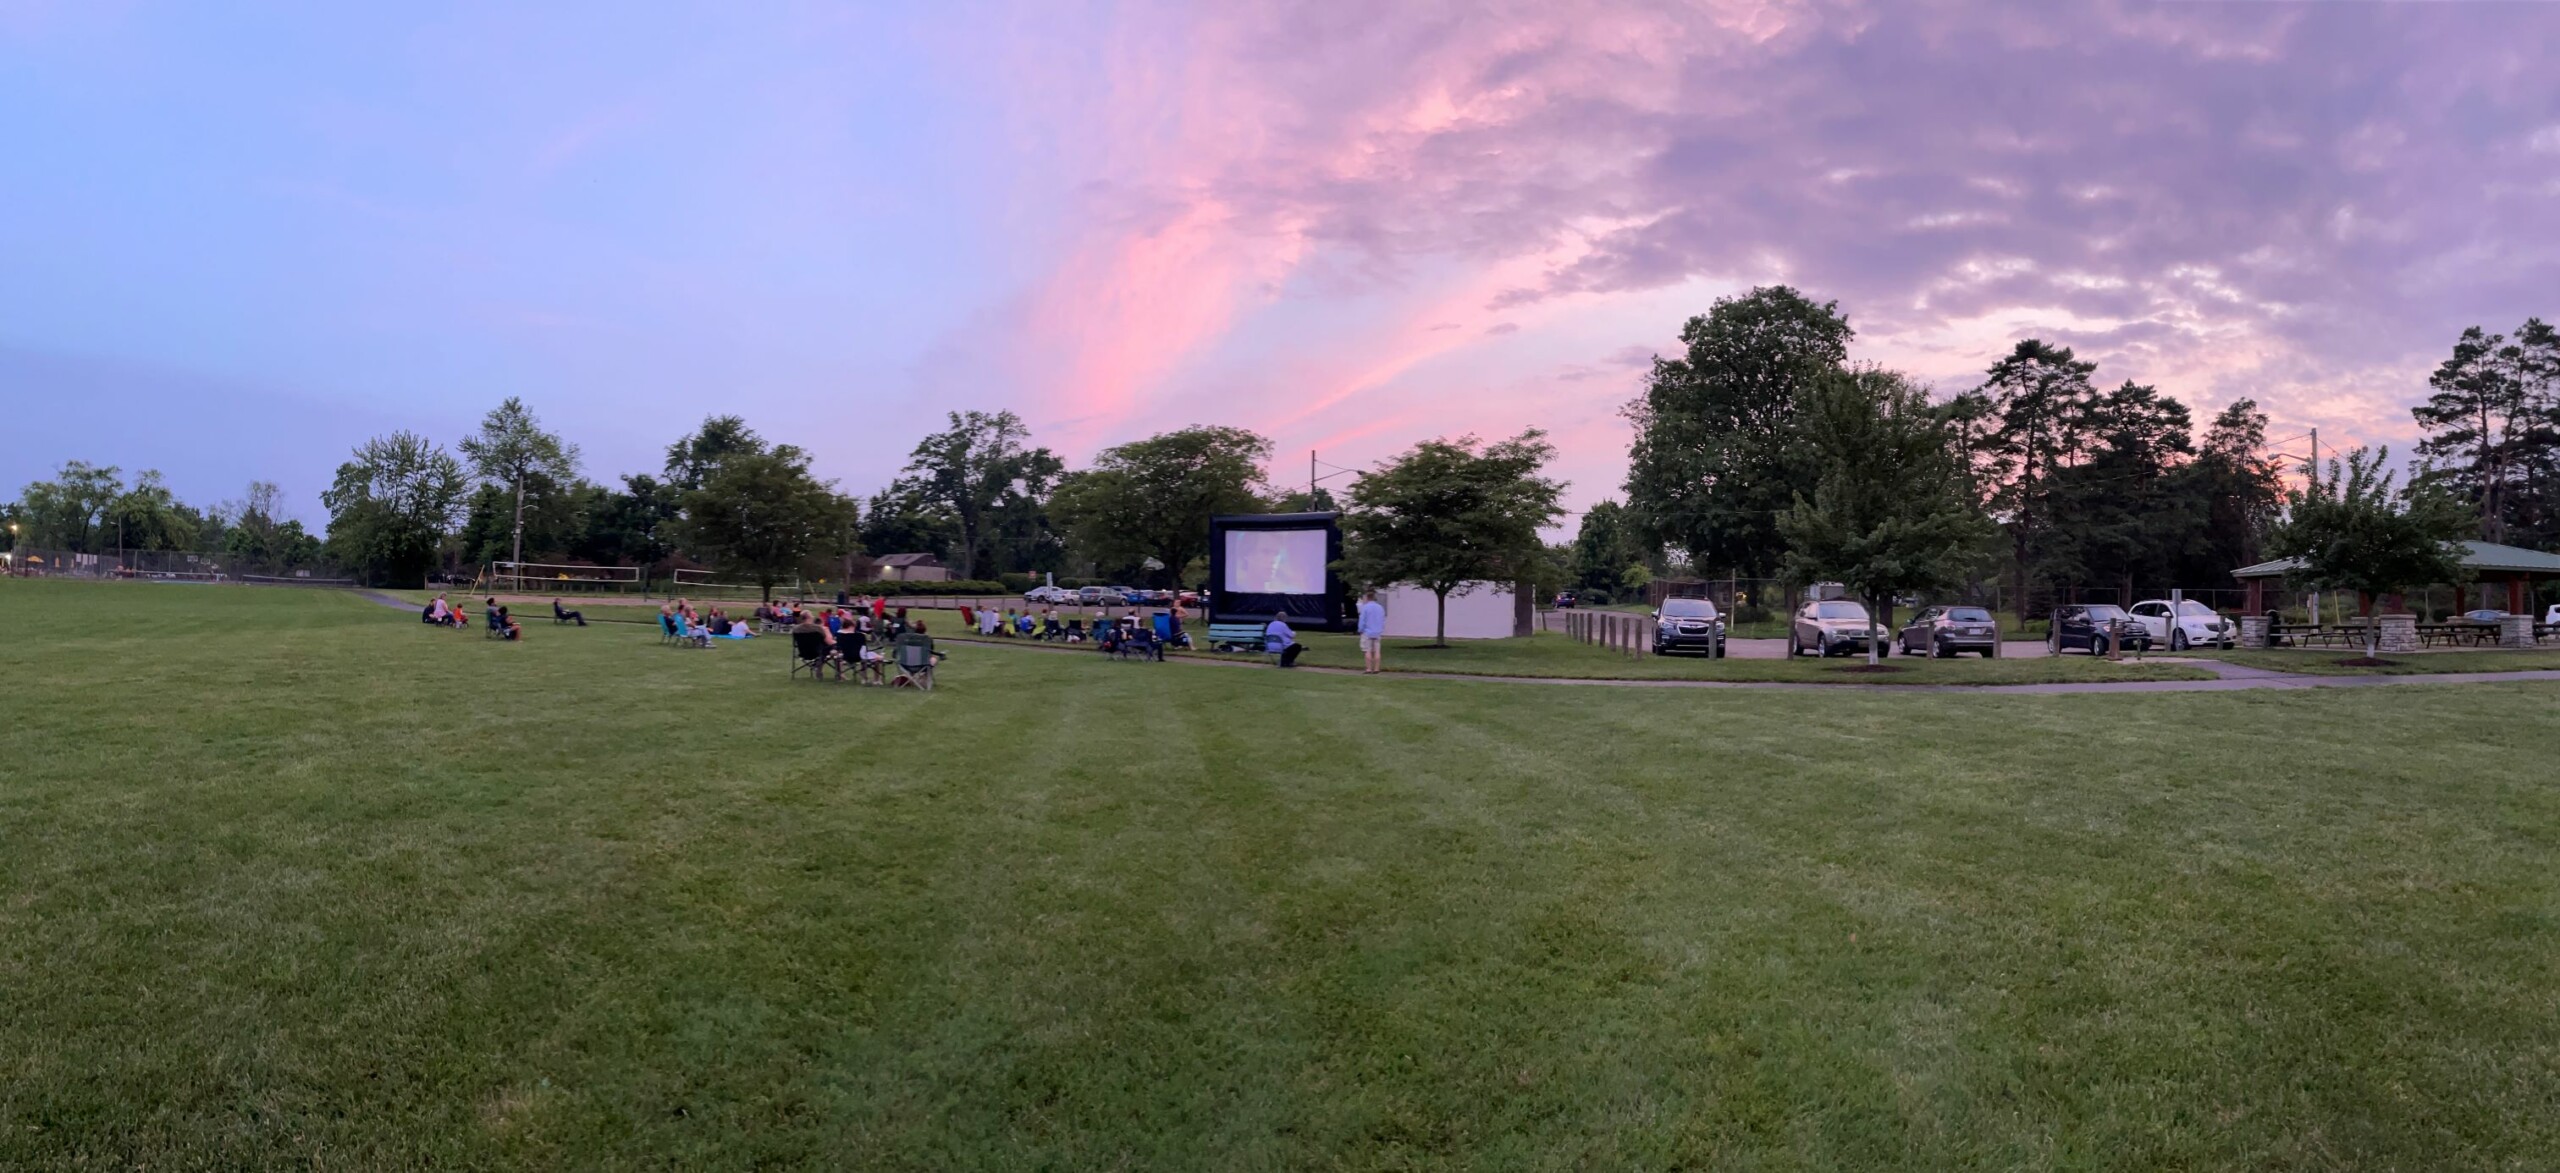 movie in the park at dusk